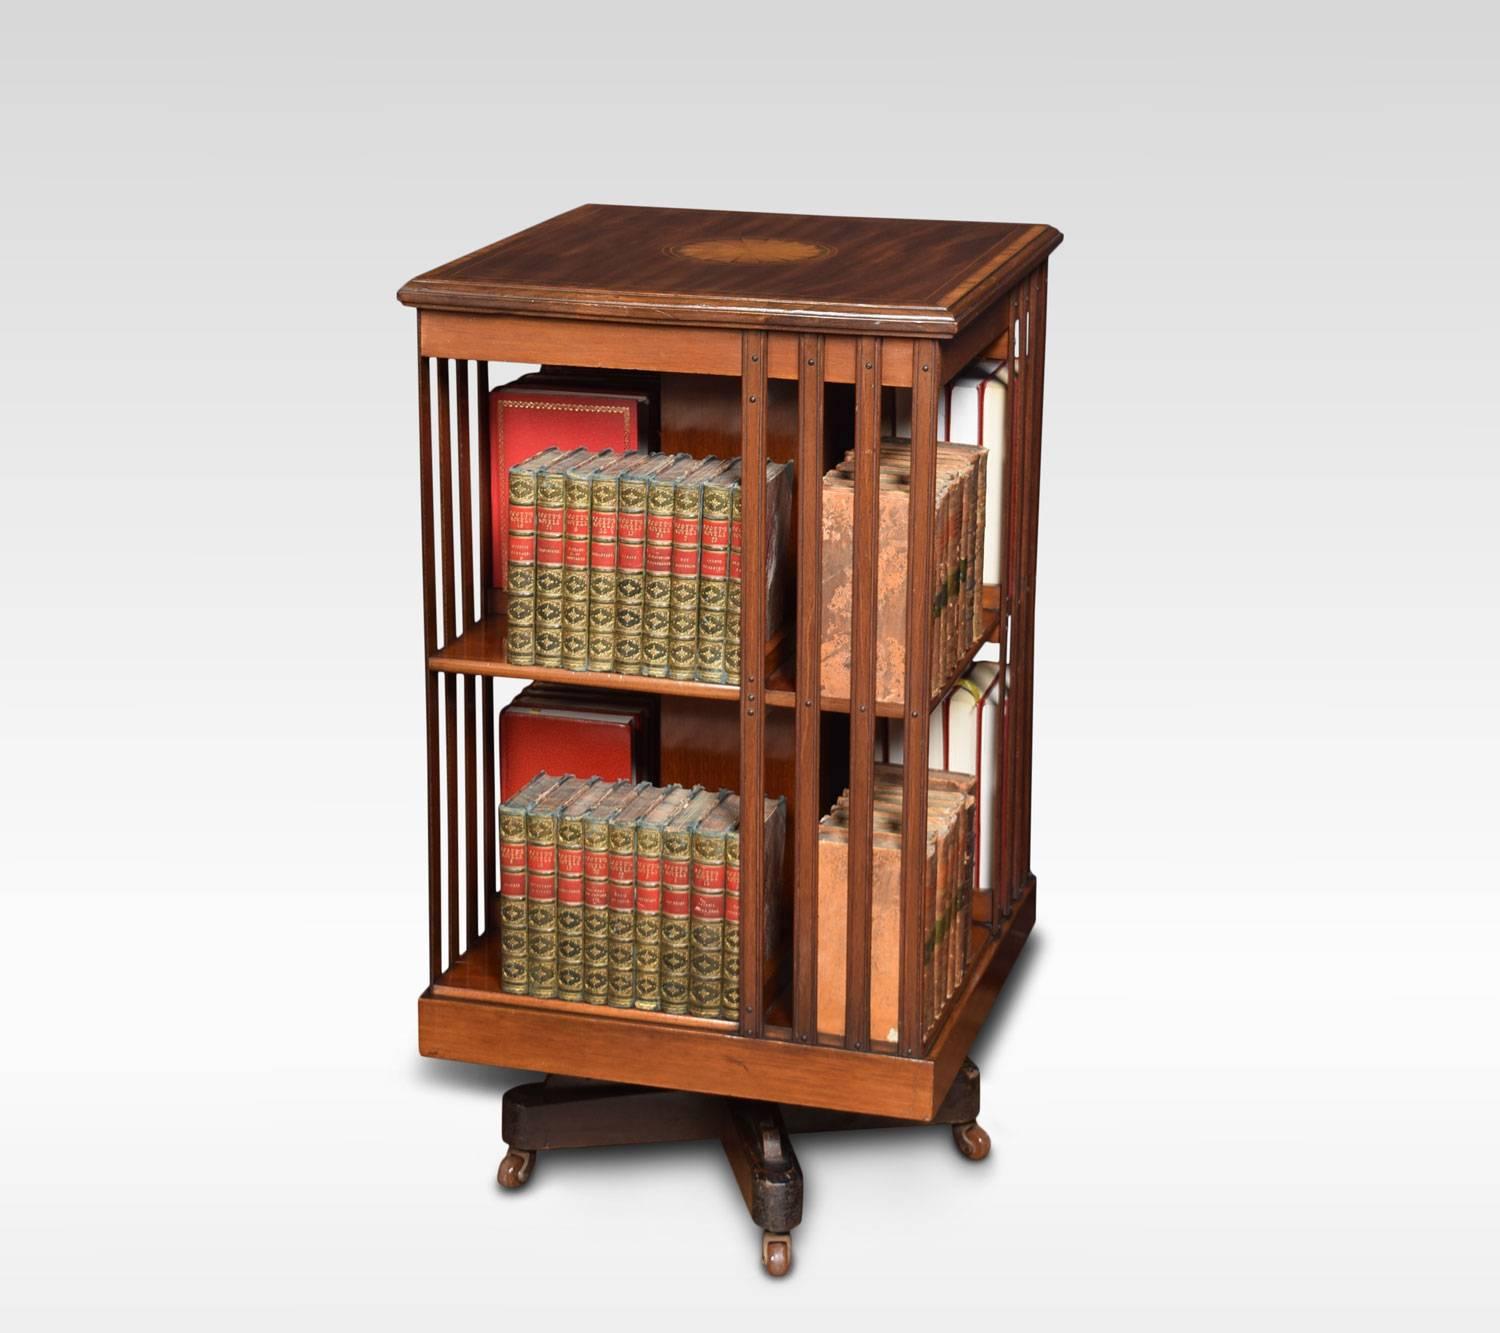 Maple & Co style mahogany revolving bookcase the satinwood crossbanded top with central fan inlay, above an arrangement off shelves raised up on a cruciform base with castors.
Dimensions:
Height 35 inches
Width 19 inches
Depth 19 inches.